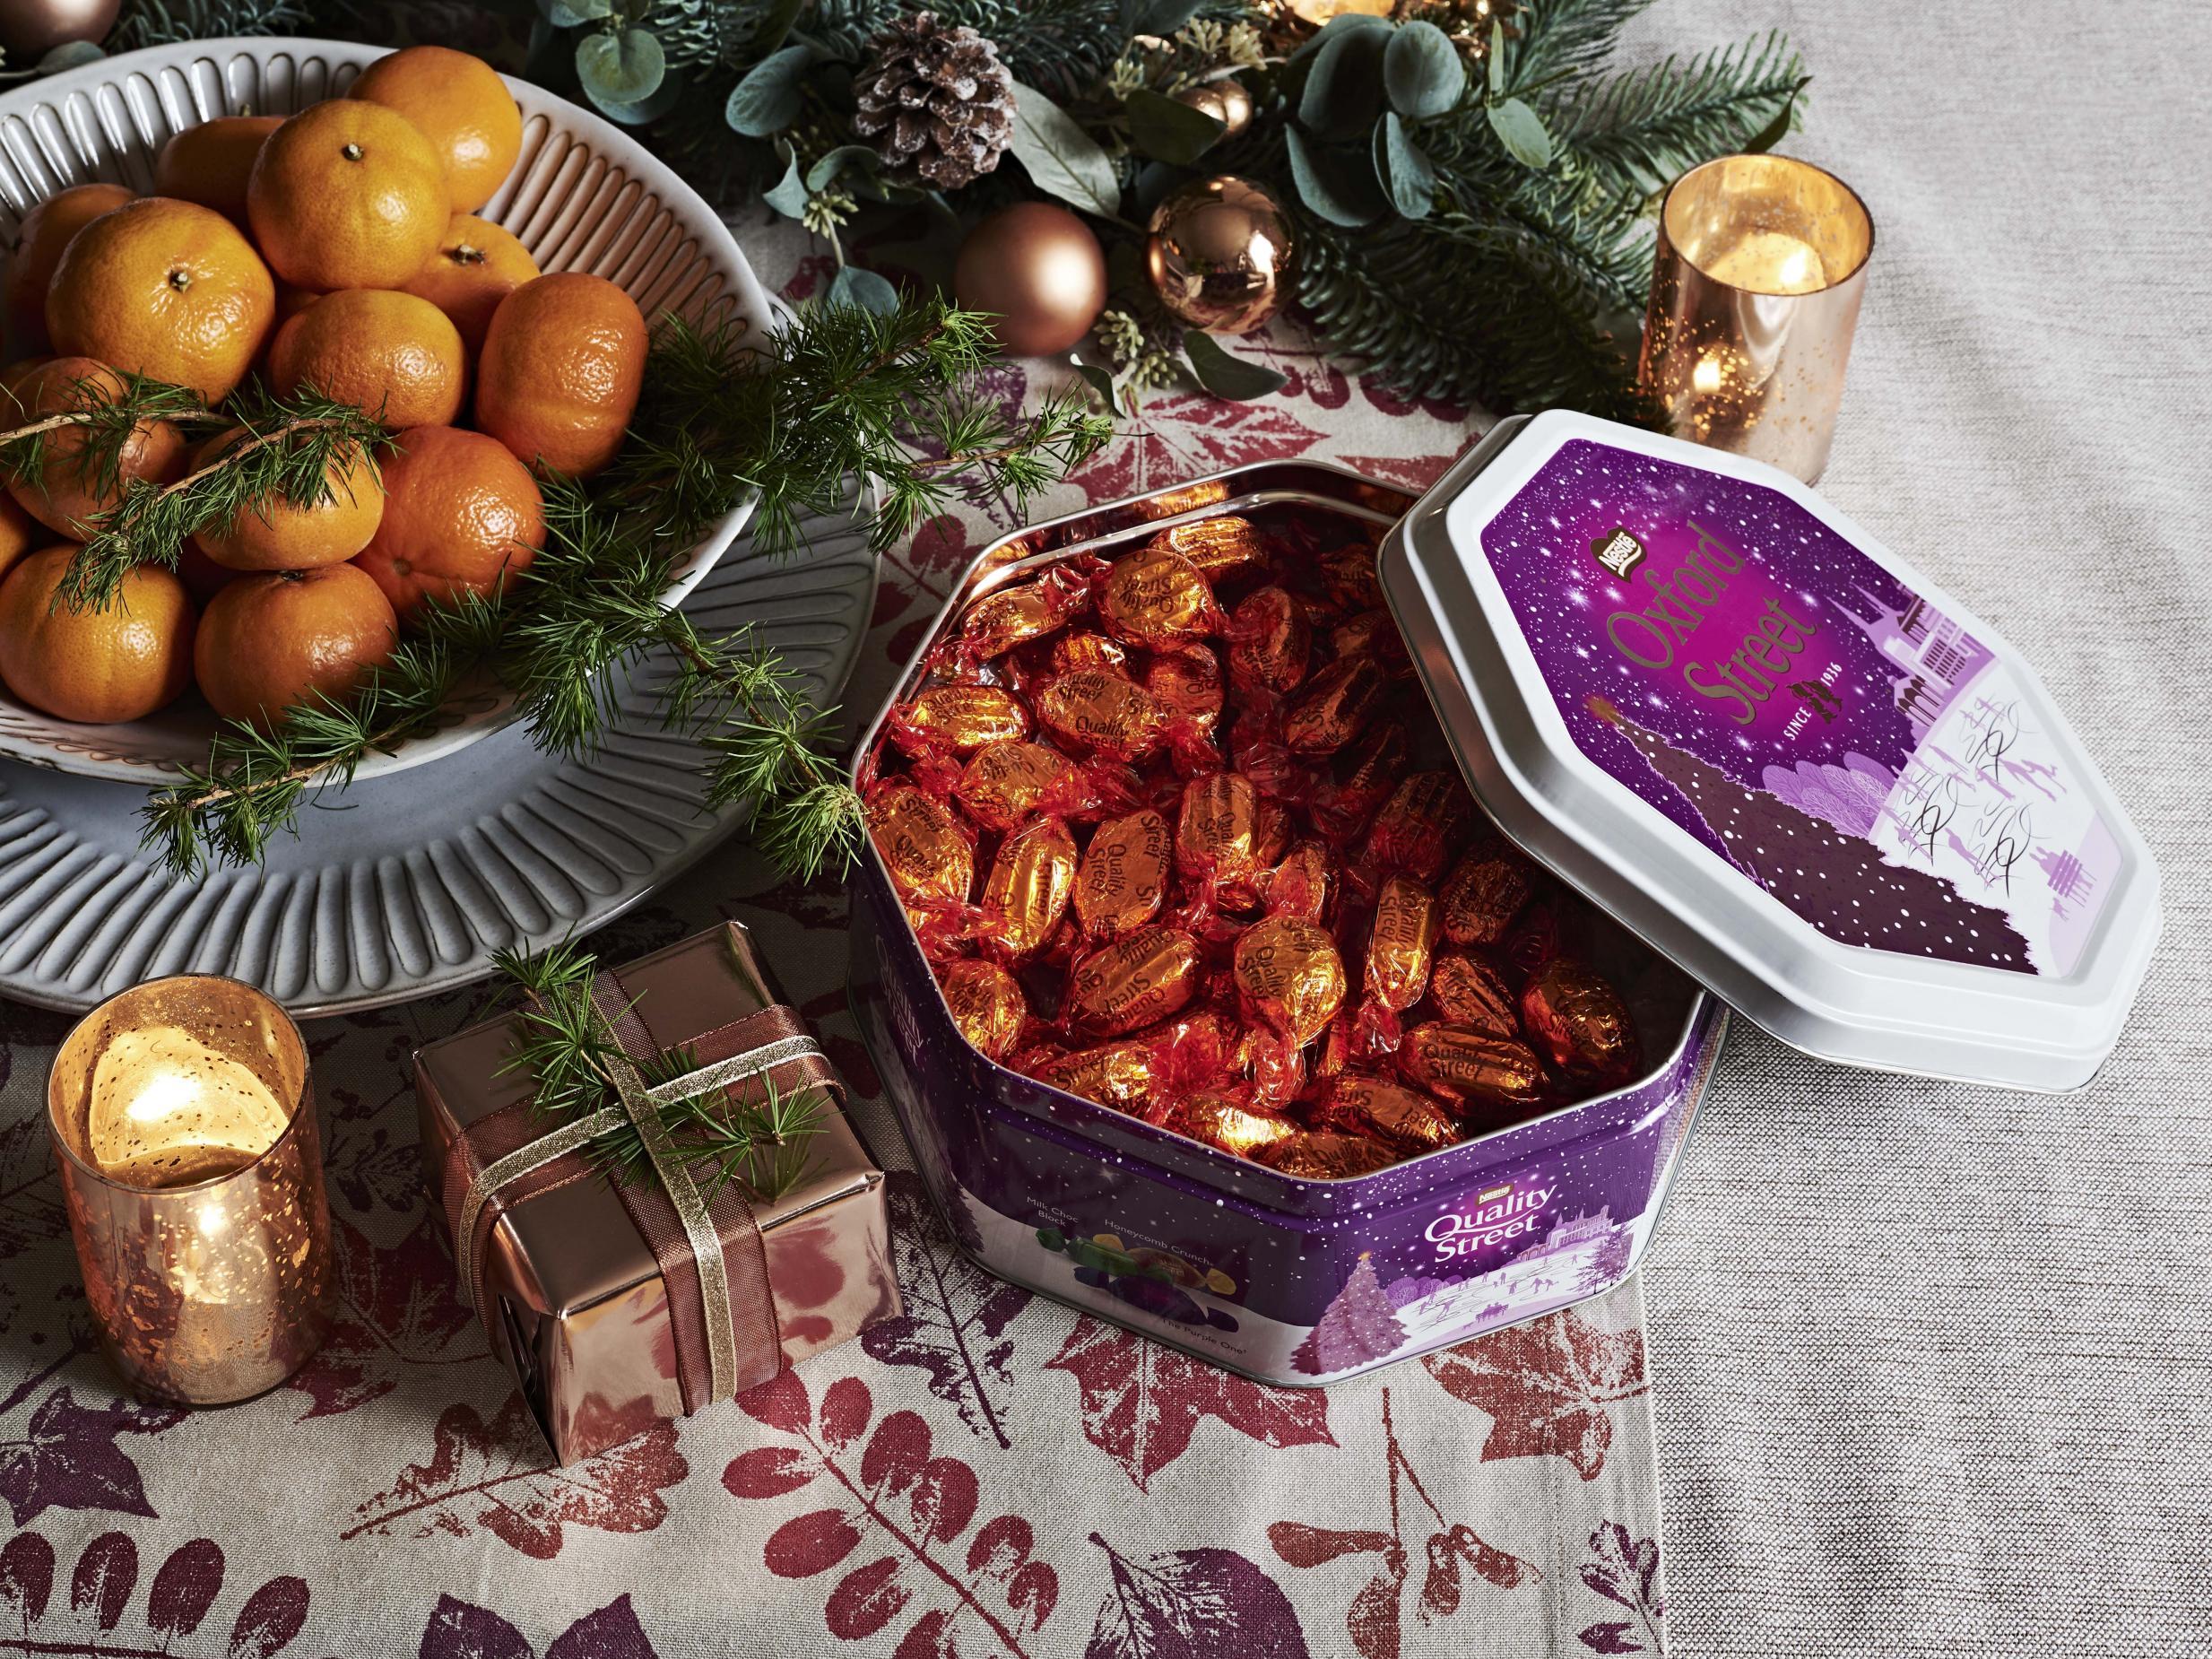 The Quality Street pick 'n' mix stations will be launched at John Lewis stores across the country from September